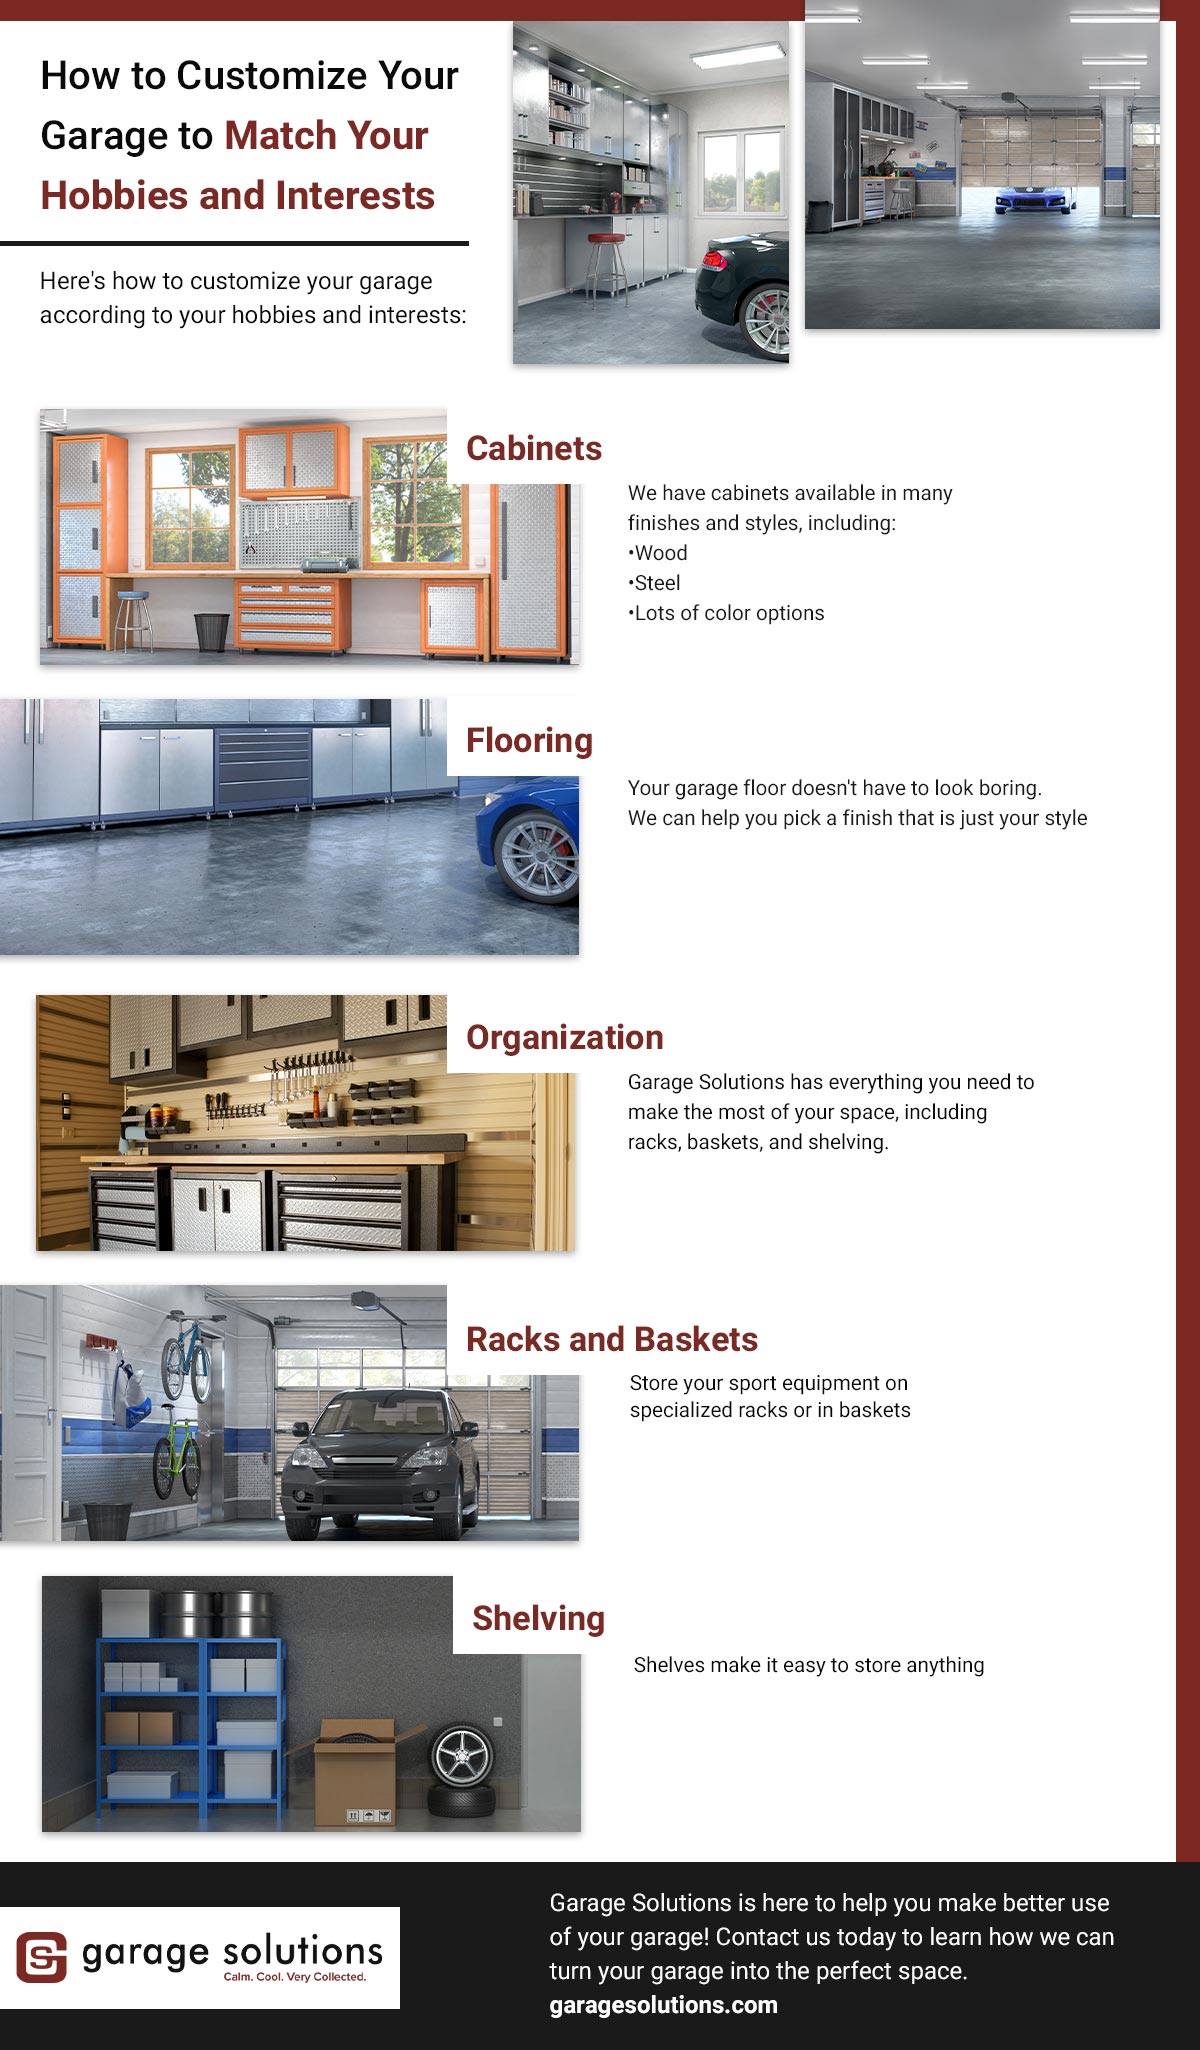 infographic about ways to organize your garage with help from garage solutions